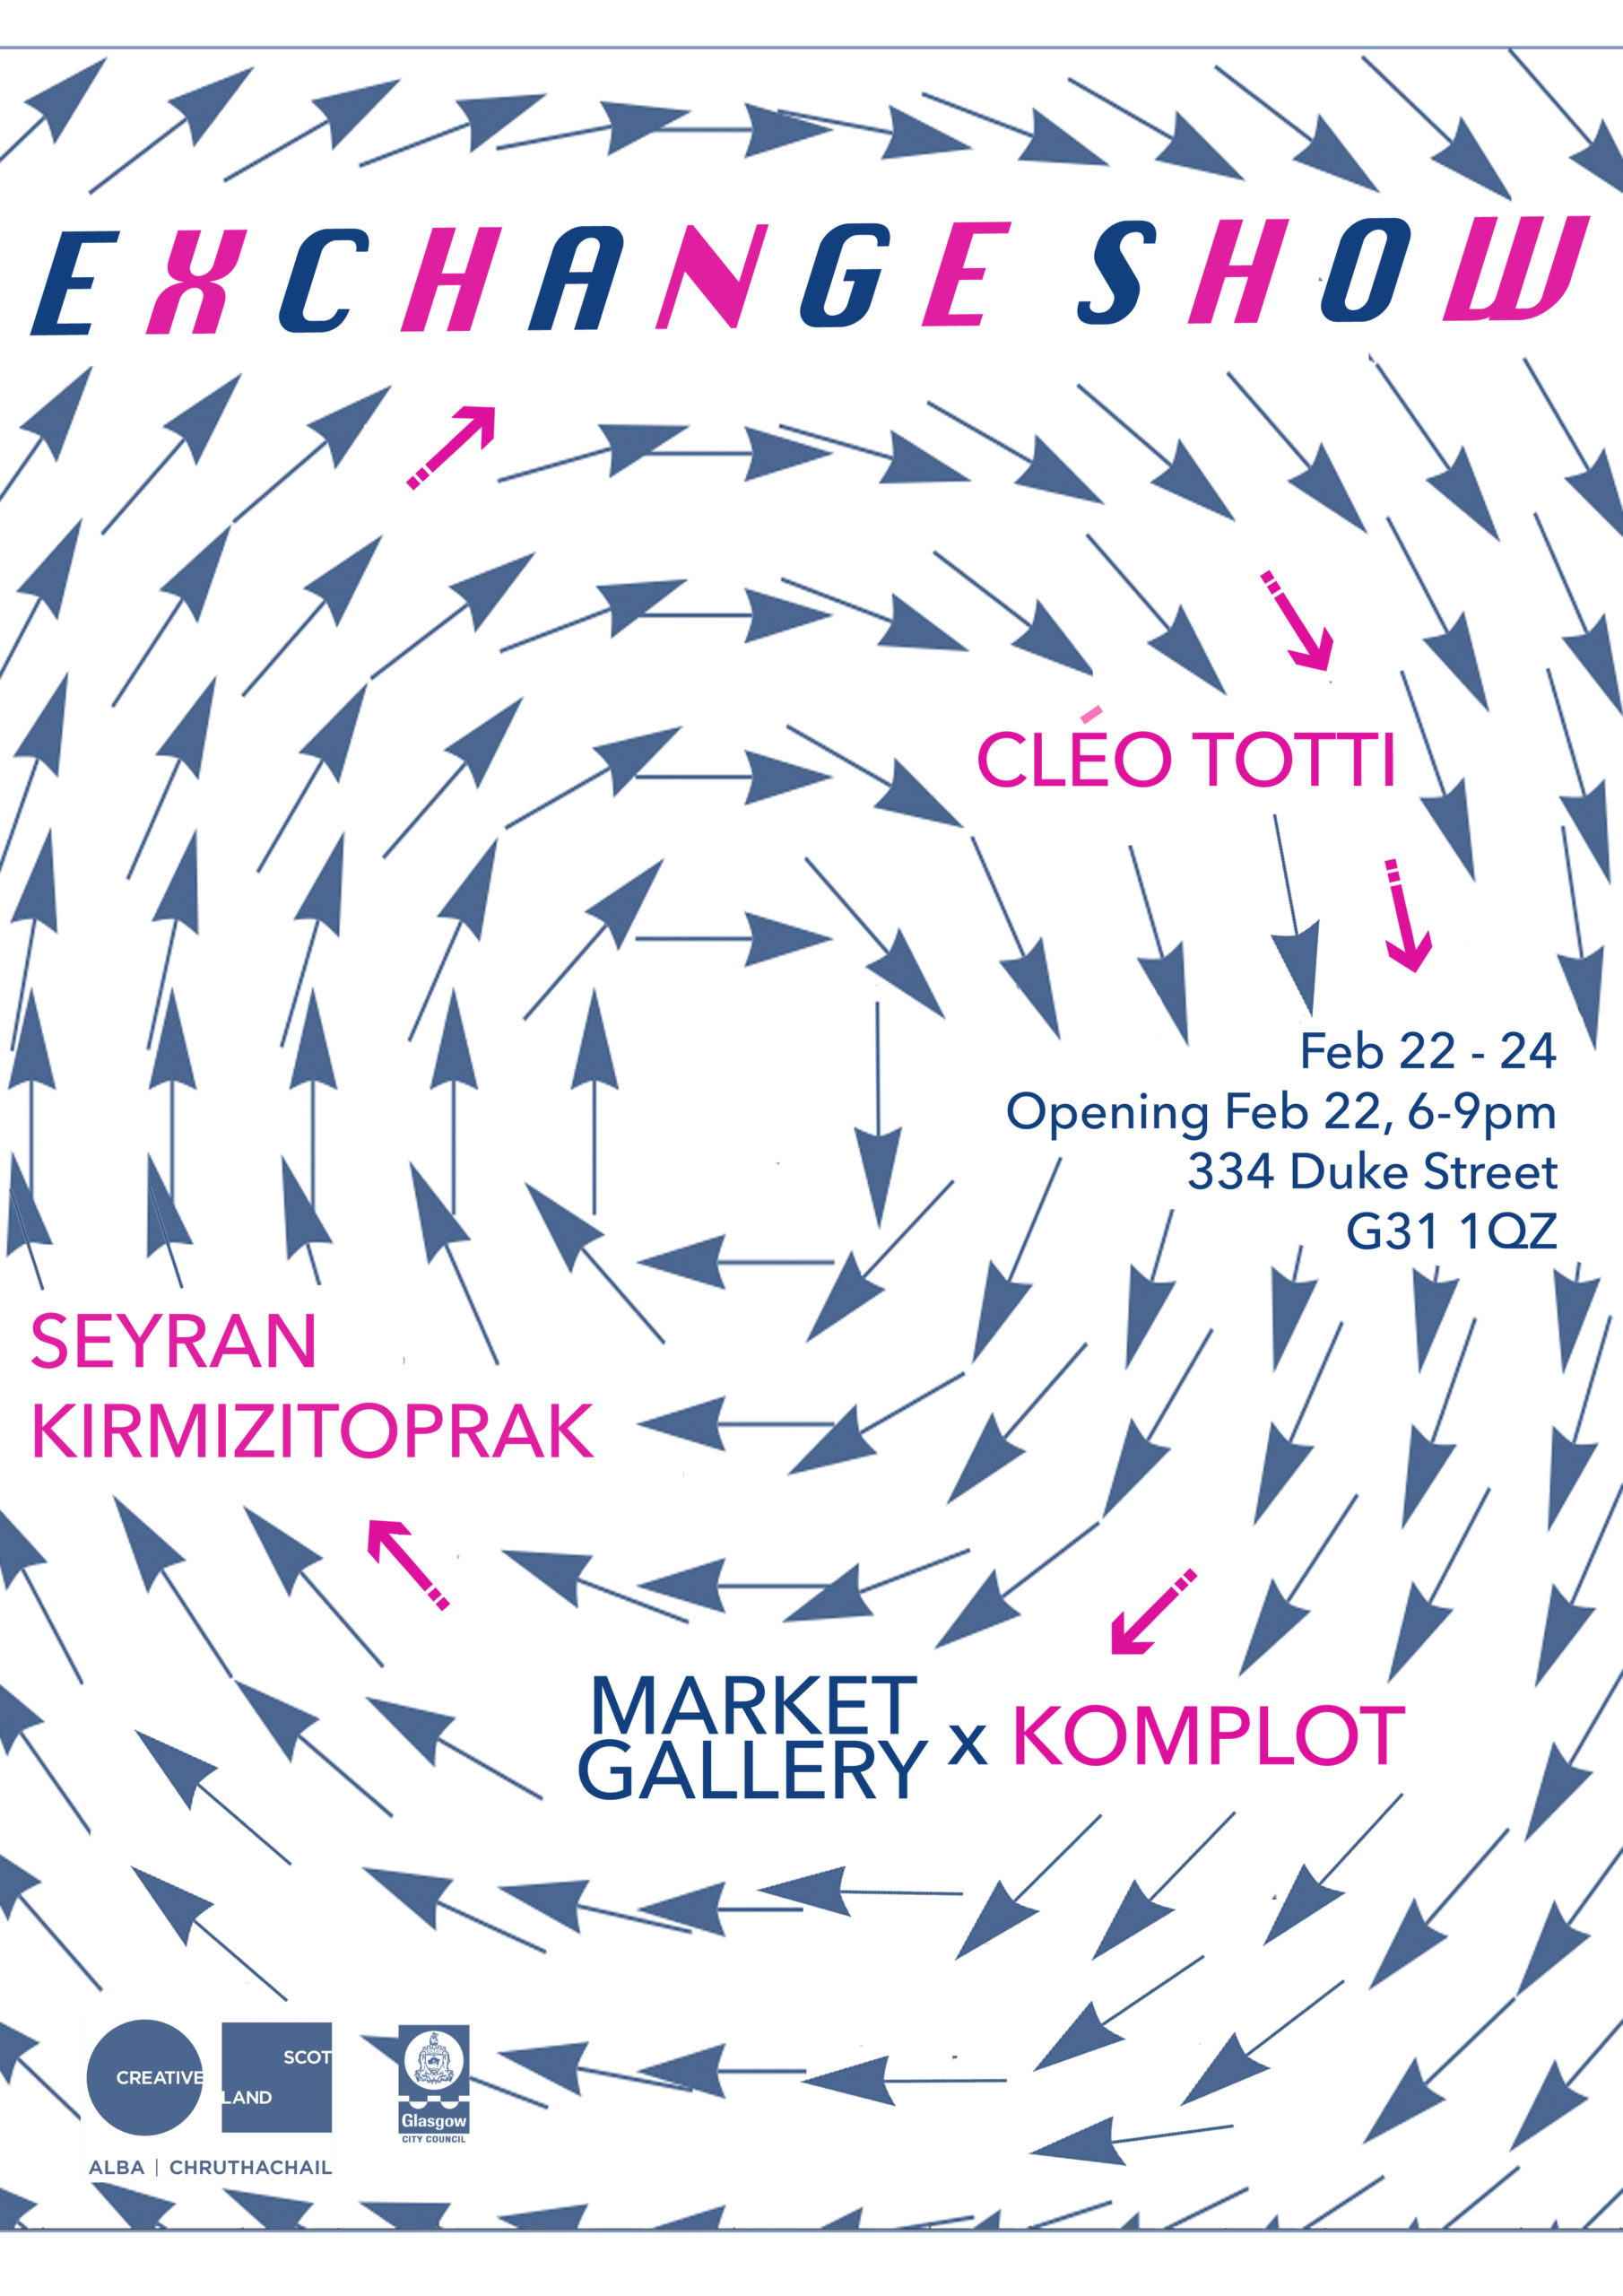 Poster composed of a vortex of dark blue arrows (resembling a meteorological display) with pink and blue text giving details of the exhibition. Title says 'Exchange Show'.